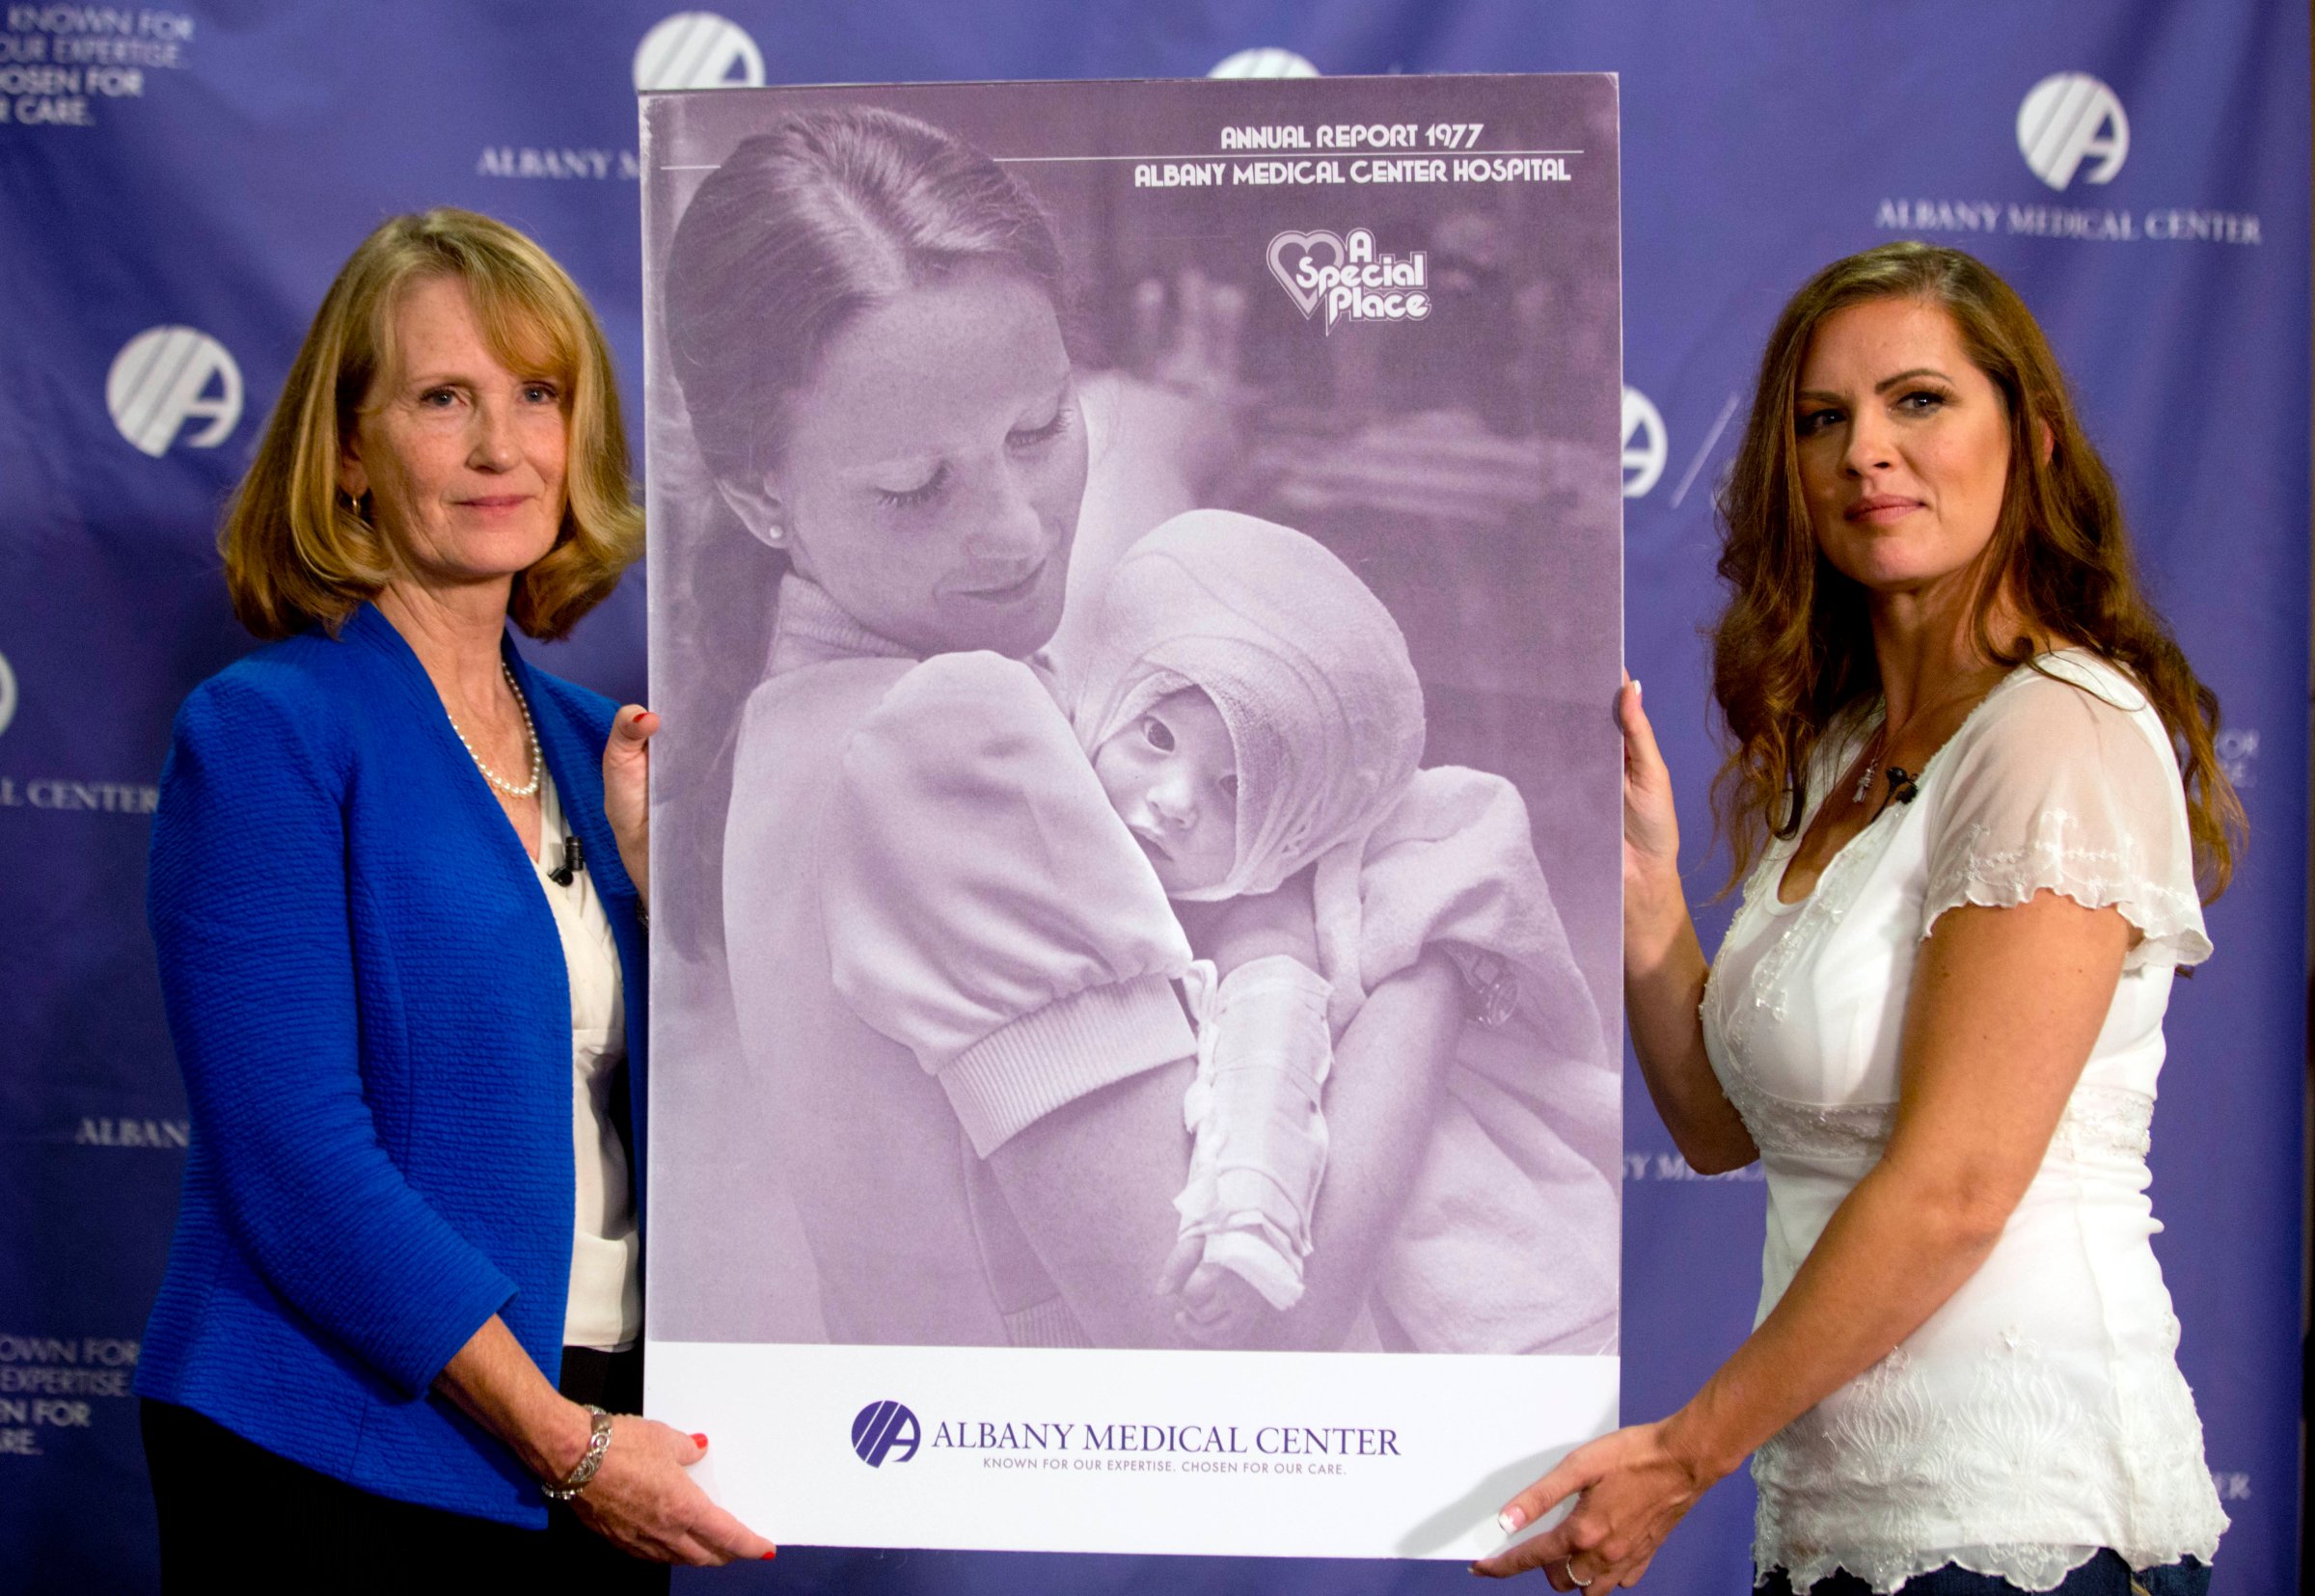 Nurse Susan Berger (L) and Amanda Scarpinati pose with a copy of a 1977 Albany Medical Center annual report during a news conference at Albany Medical Center in Albany, N.Y. on Sept. 29, 2015.